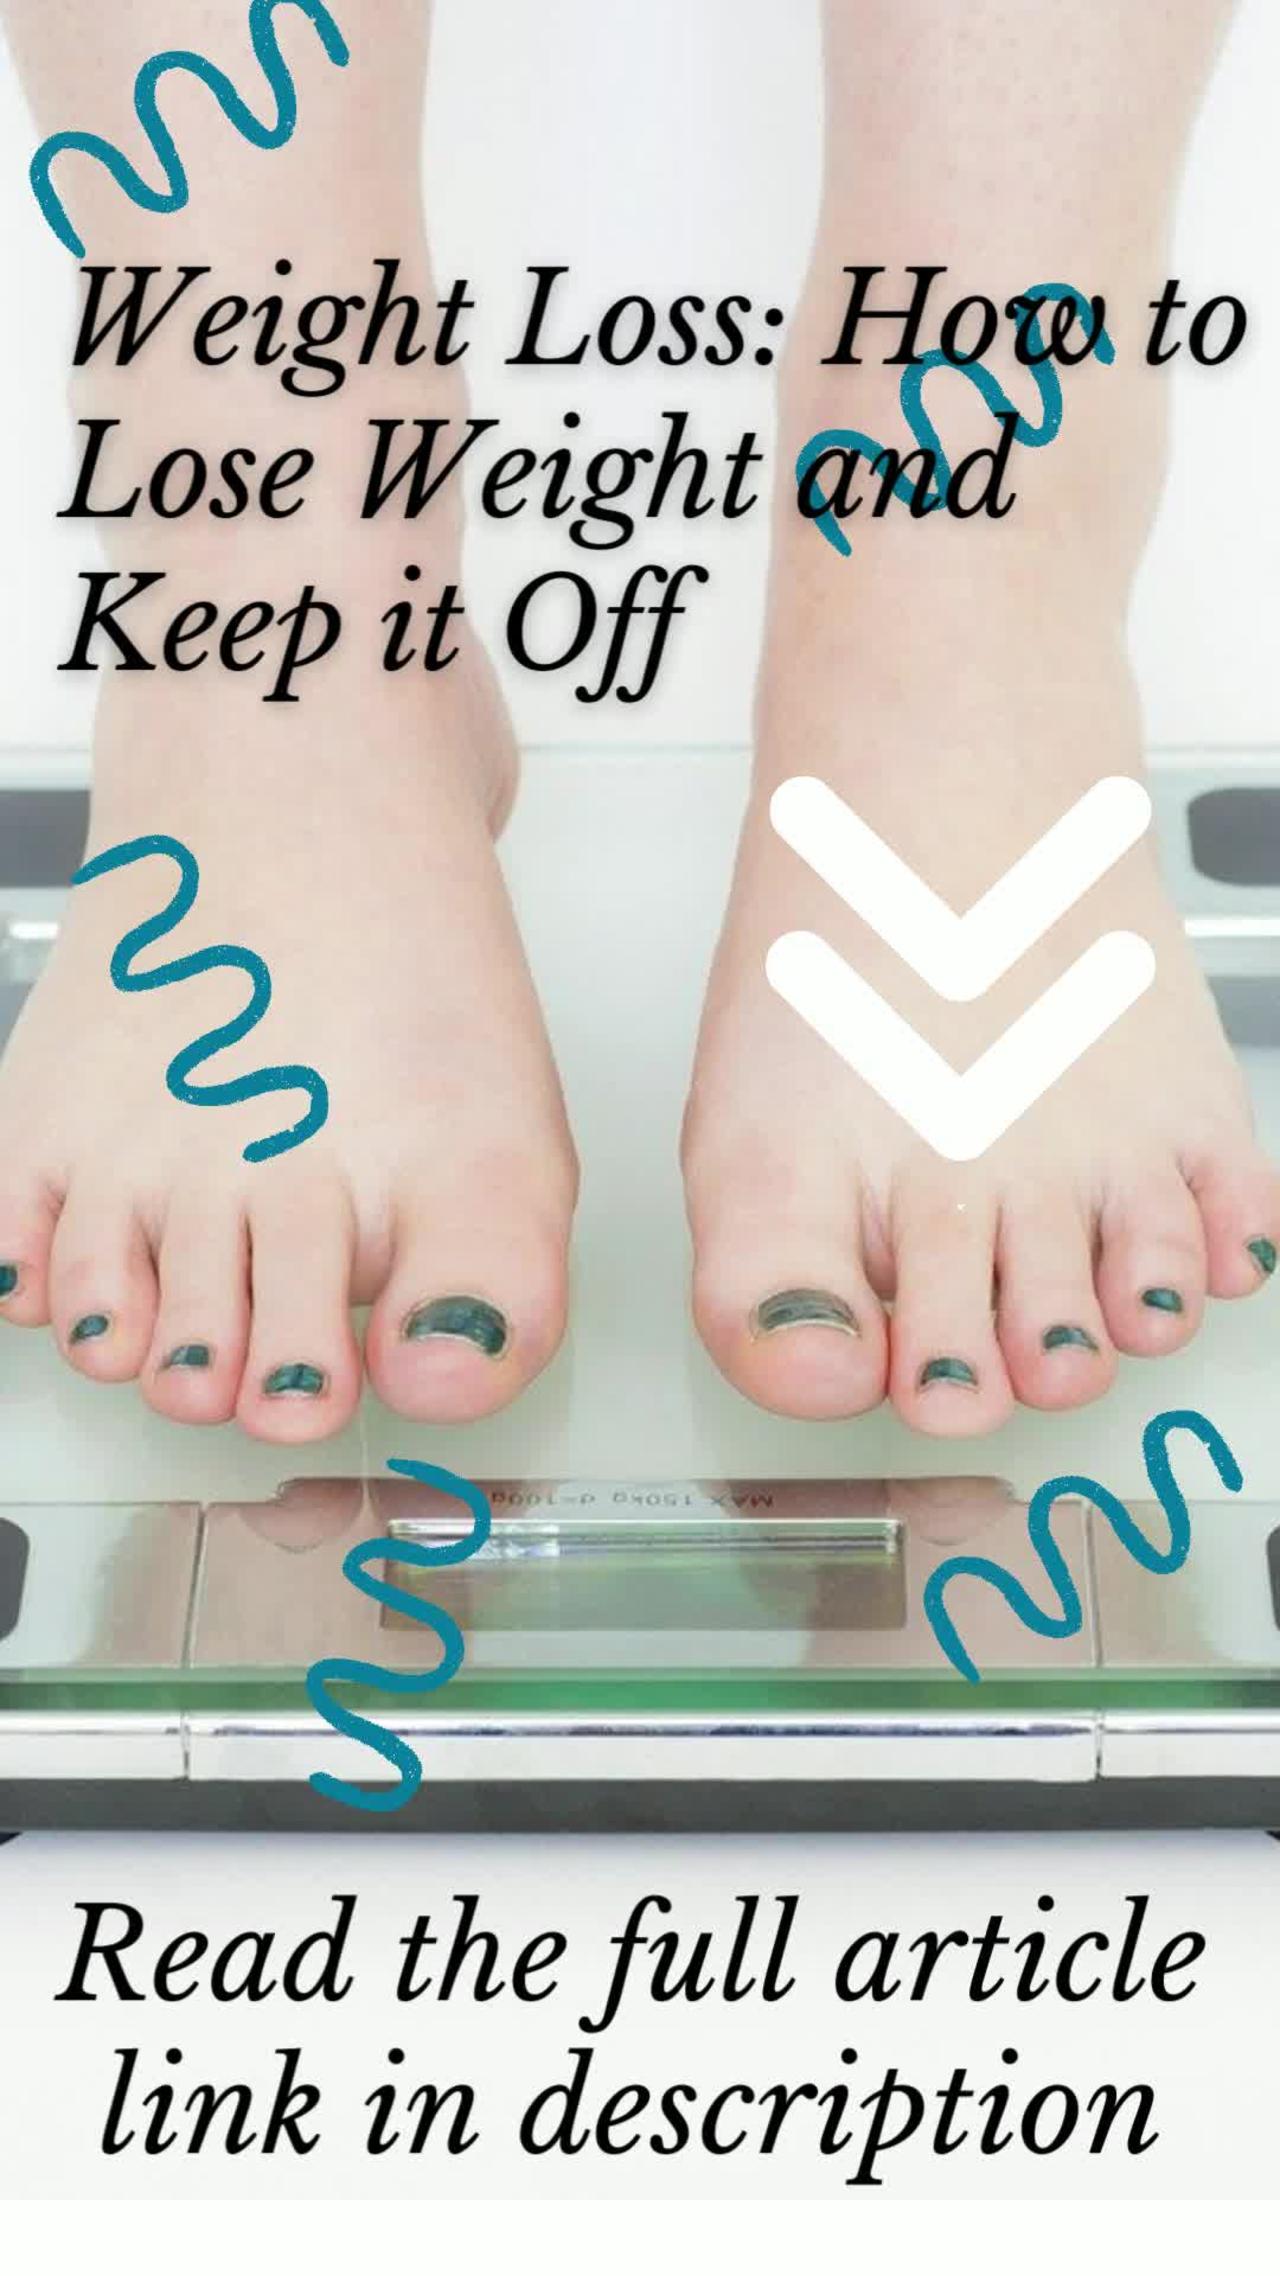 Weight Loss: How to Lose Weight and Keep it Off.